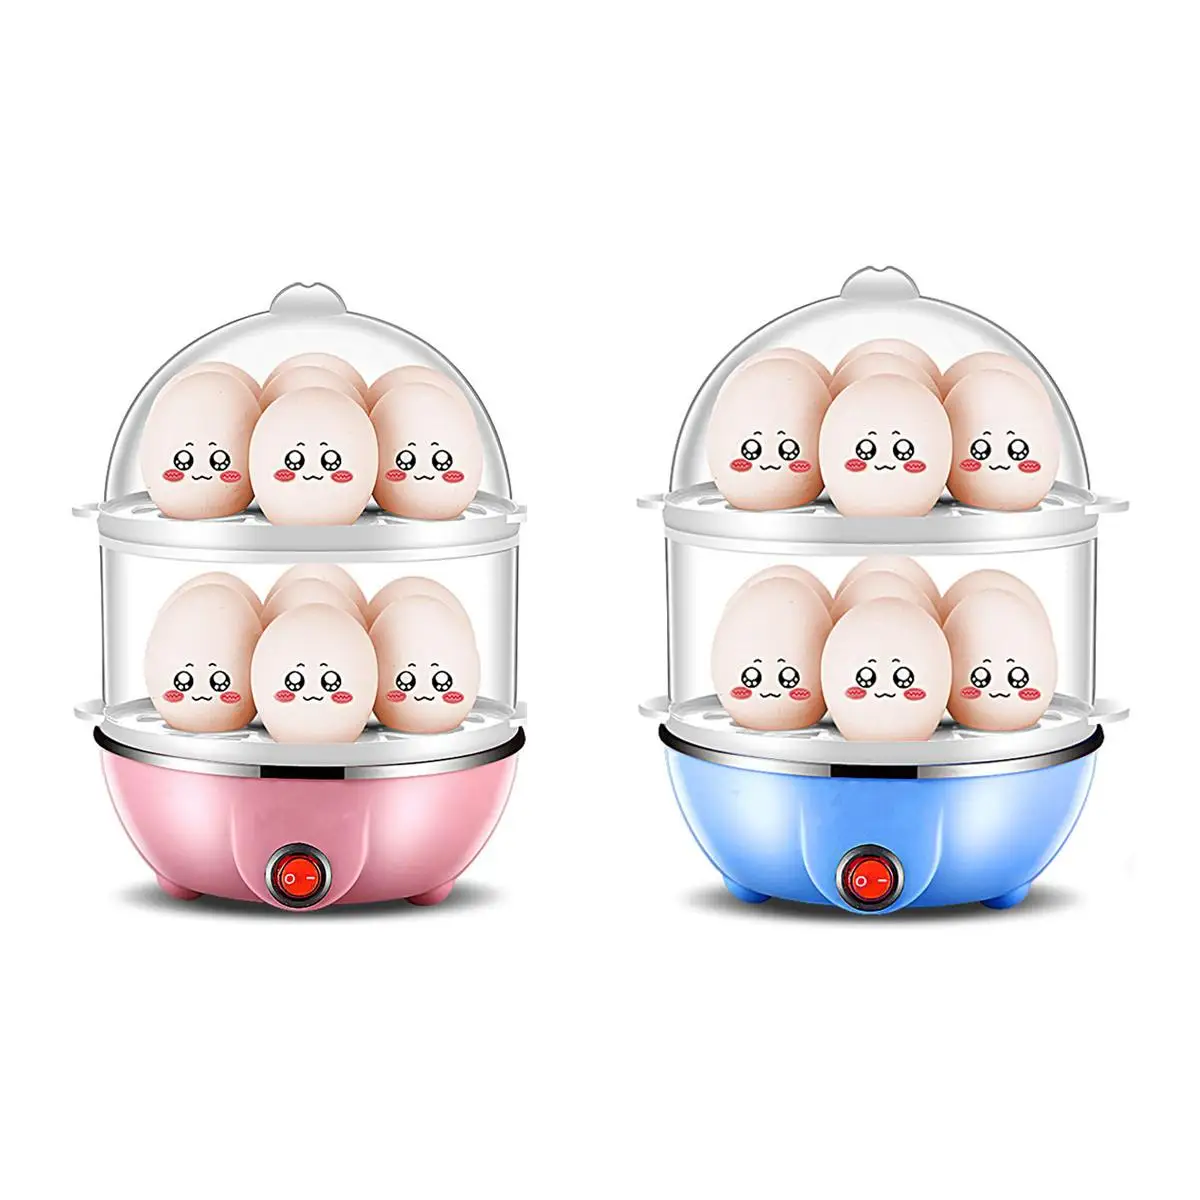 

350W Double Layer 14 Eggs Capacity Cooker Egg Boiler Steamer Electric Egg Cooker Corn Milk Steamed Kitchen Cooking Machine